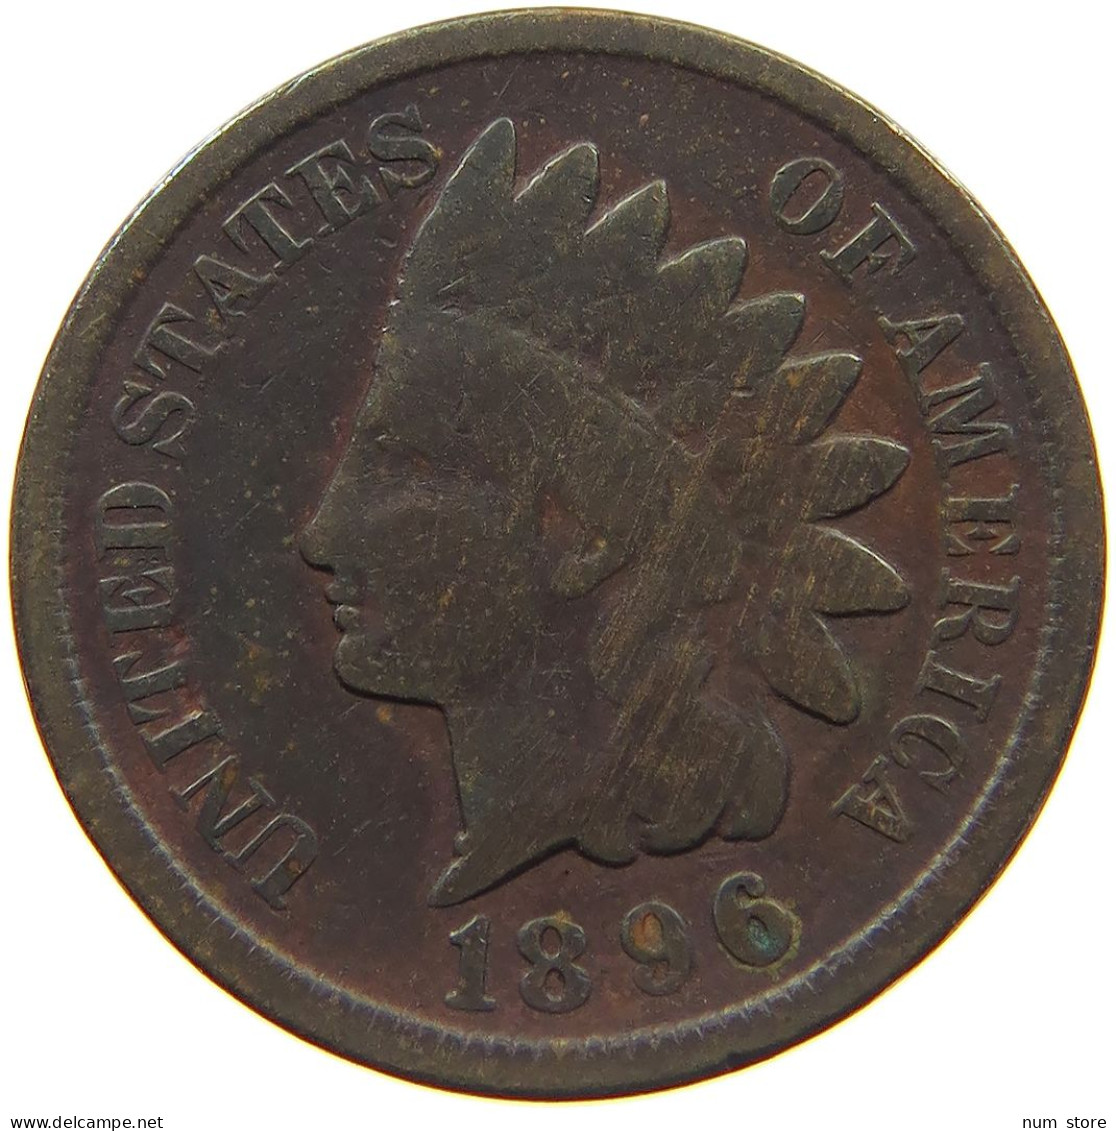 UNITED STATES OF AMERICA CENT 1896 INDIAN HEAD #c012 0141 - 1859-1909: Indian Head